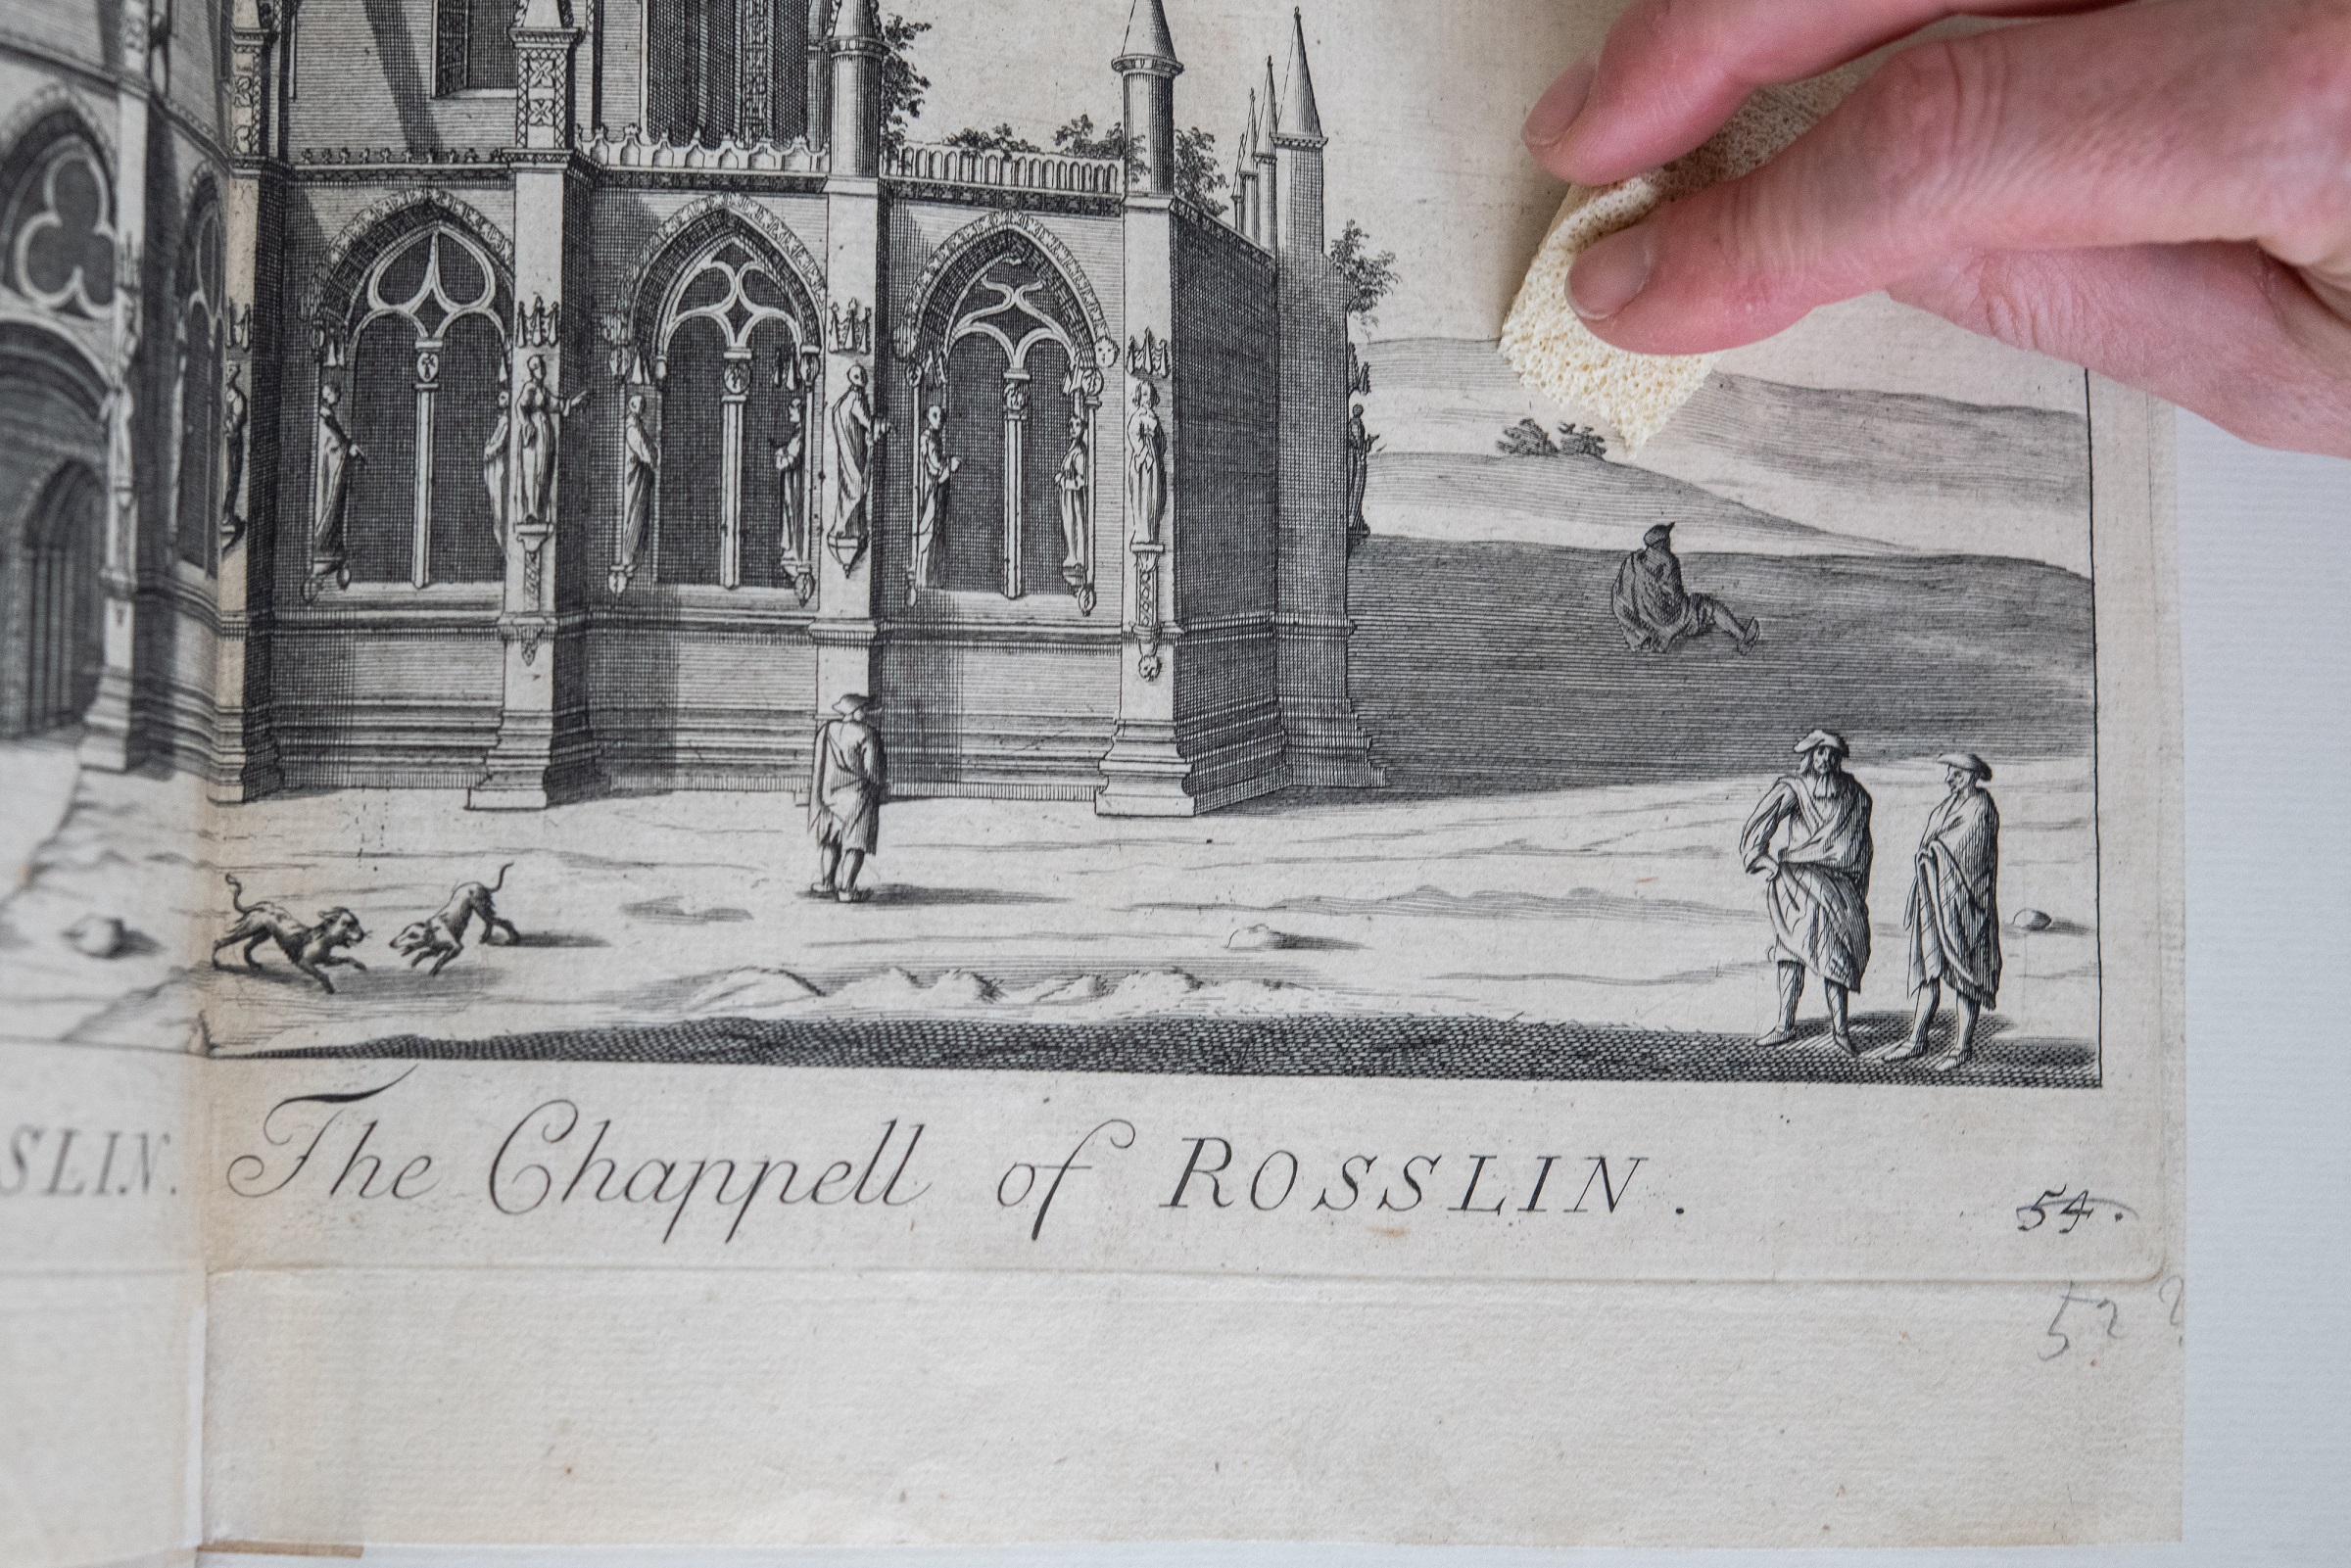 A close up showing a page of the book. A hand is shown cleaning the page with a small sponge. 